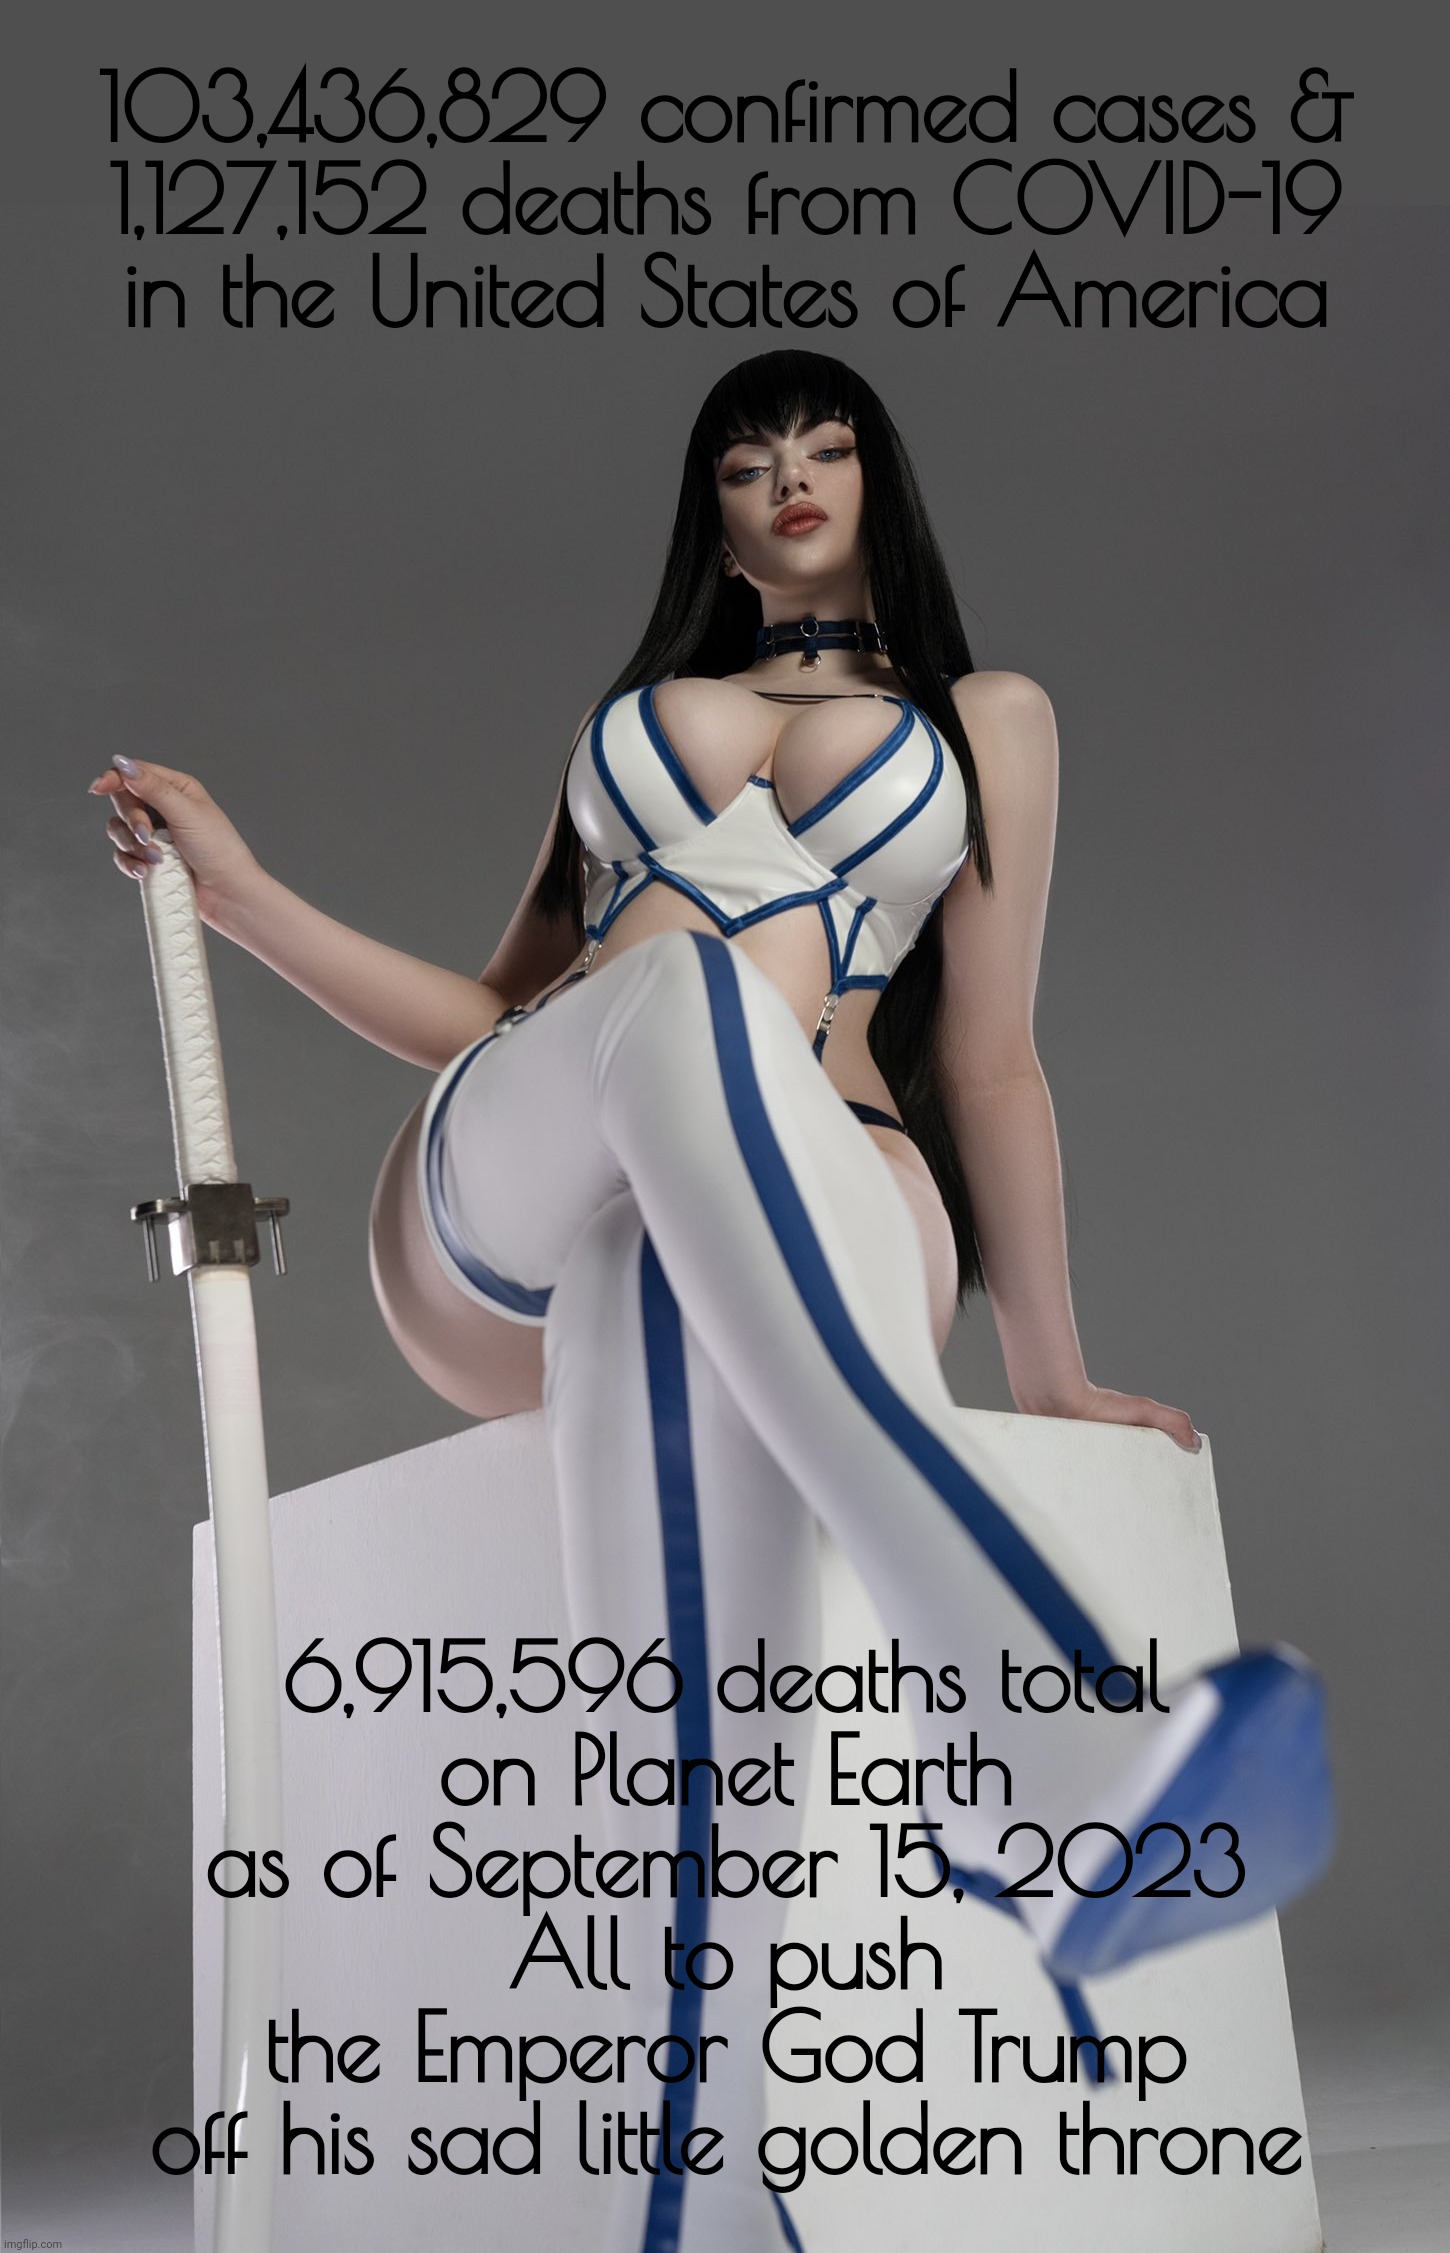 Satsuki Kiryuin by Alina Becker | 103,436,829 confirmed cases &
1,127,152 deaths from COVID-19 in the United States of America 6,915,596 deaths total
on Planet Earth
as of Se | image tagged in satsuki kiryuin by alina becker,covid-19,covid deaths | made w/ Imgflip meme maker